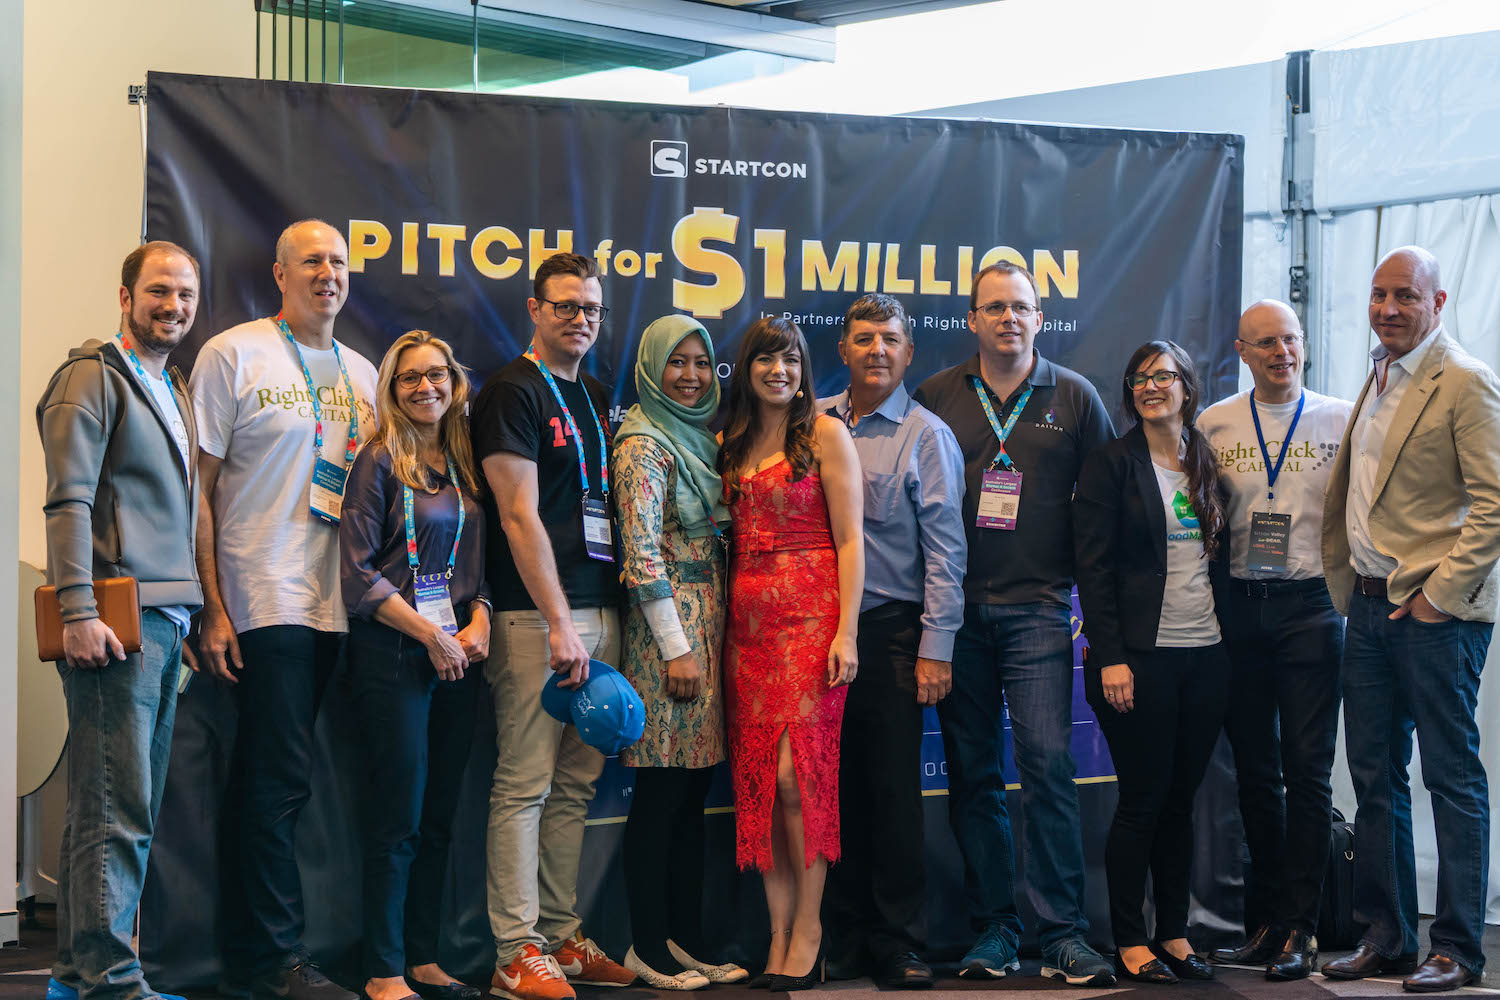 The top 6 finalists out of the 600 startups that pitched